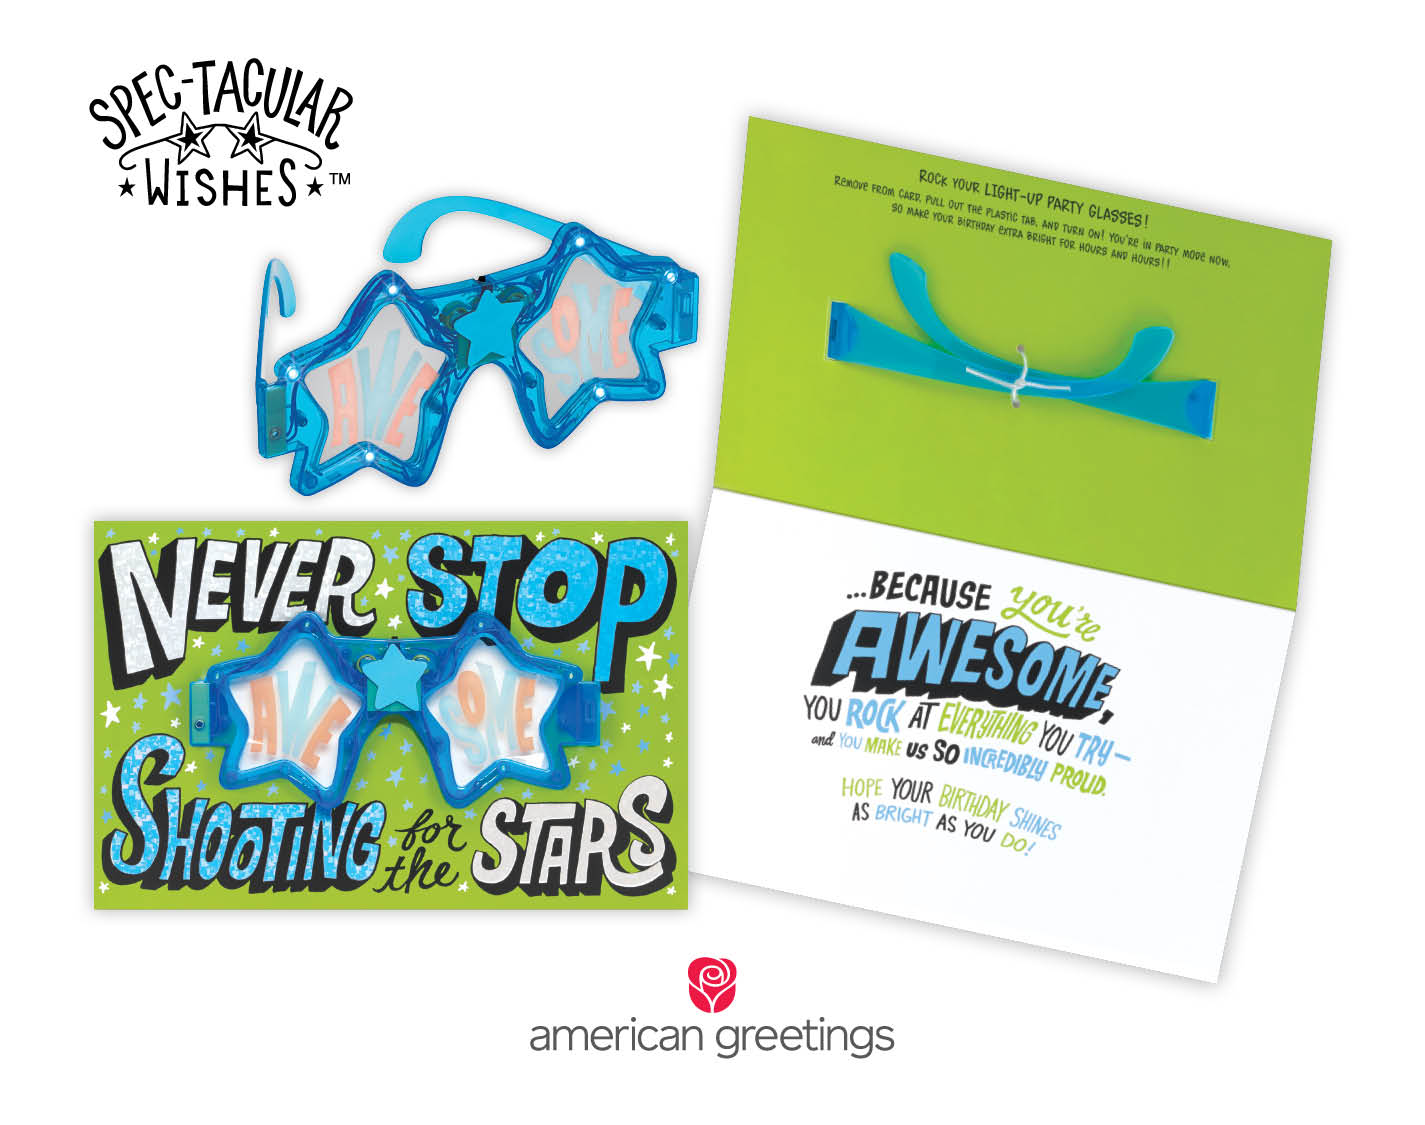 New Spec-Tacular Wishes birthday cards from American Greetings pair bold lettering designs with wearable, light-up party glasses for the ultimate card and gift combo for kids.